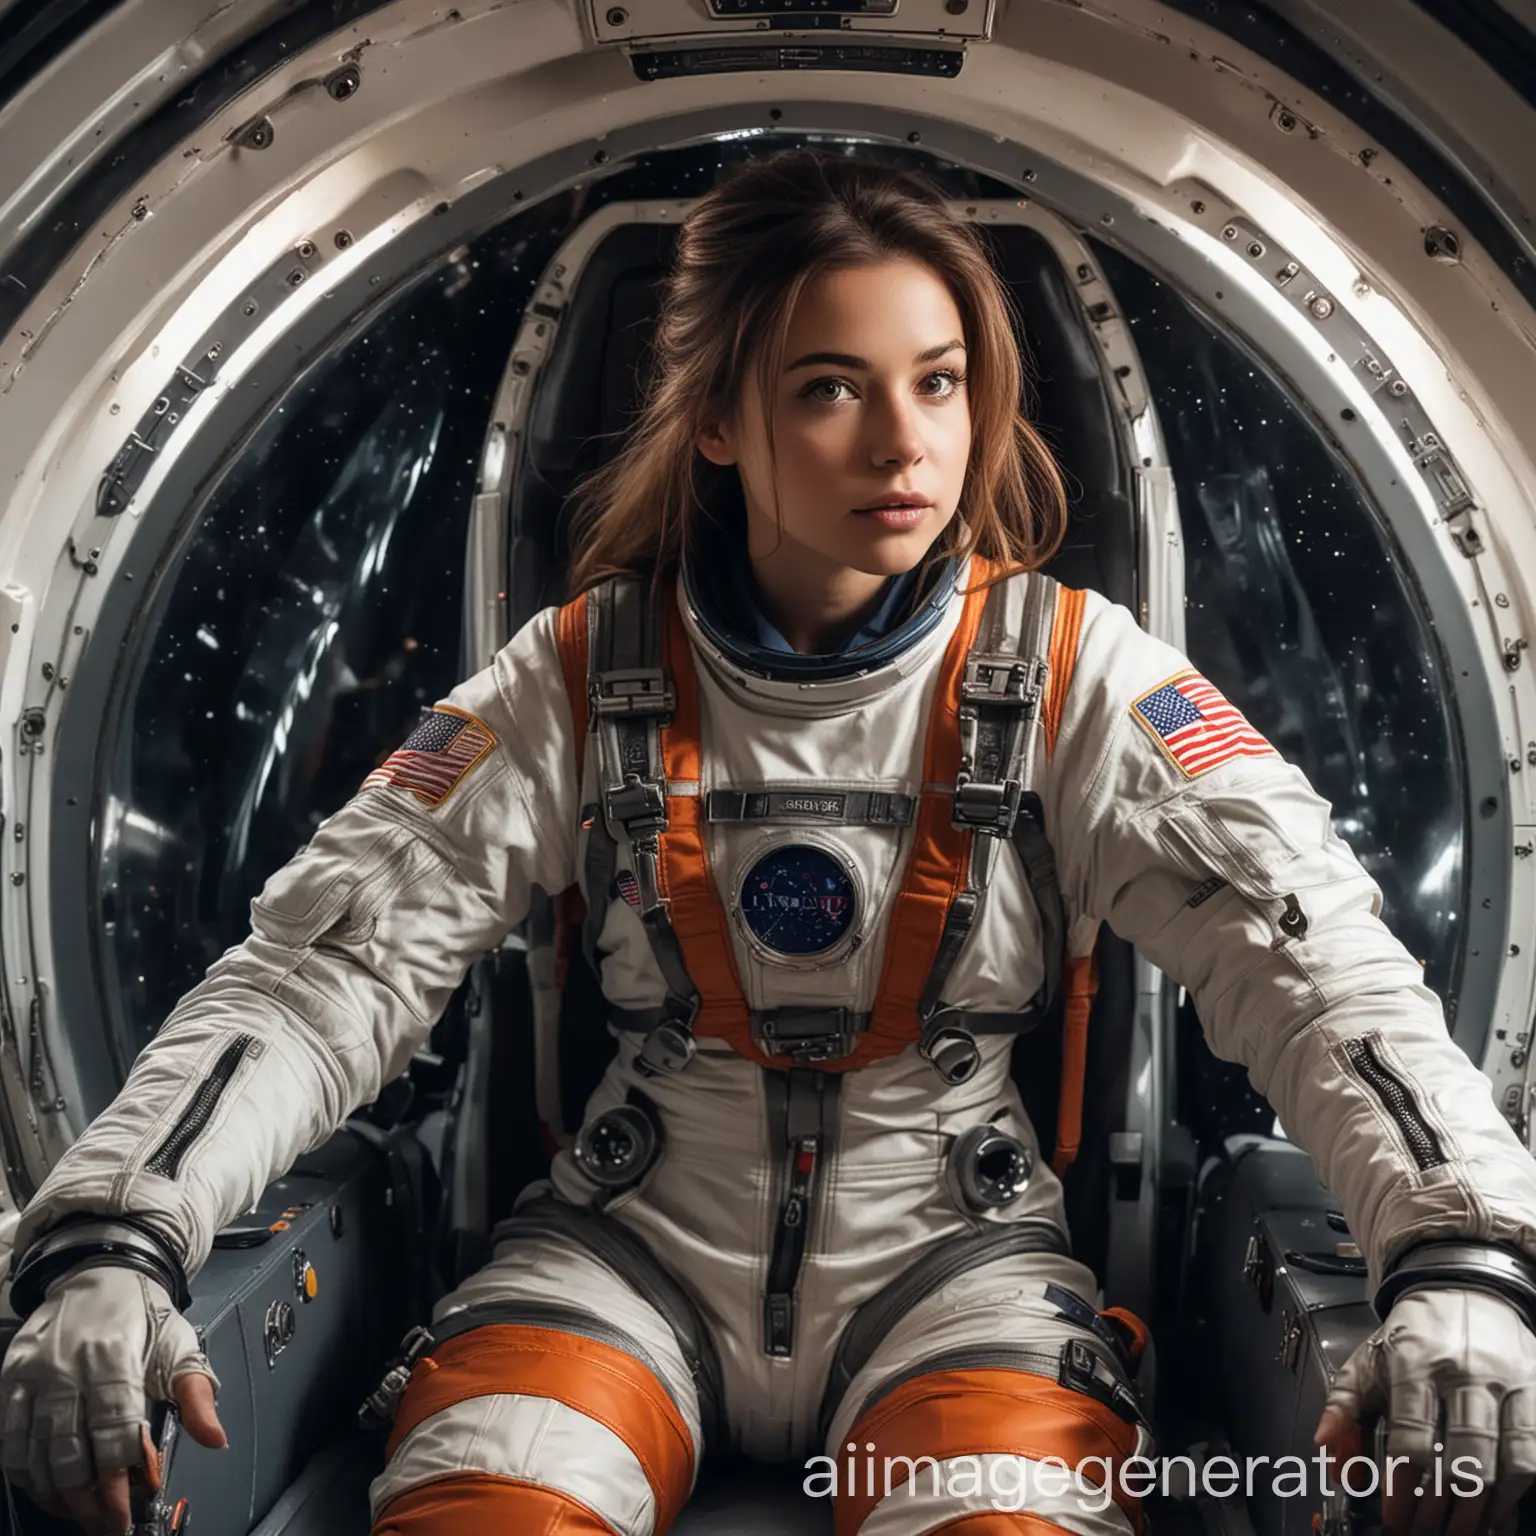 Brave-Female-Astronaut-in-Rocket-Ship-Ready-for-Lightspeed-Travel